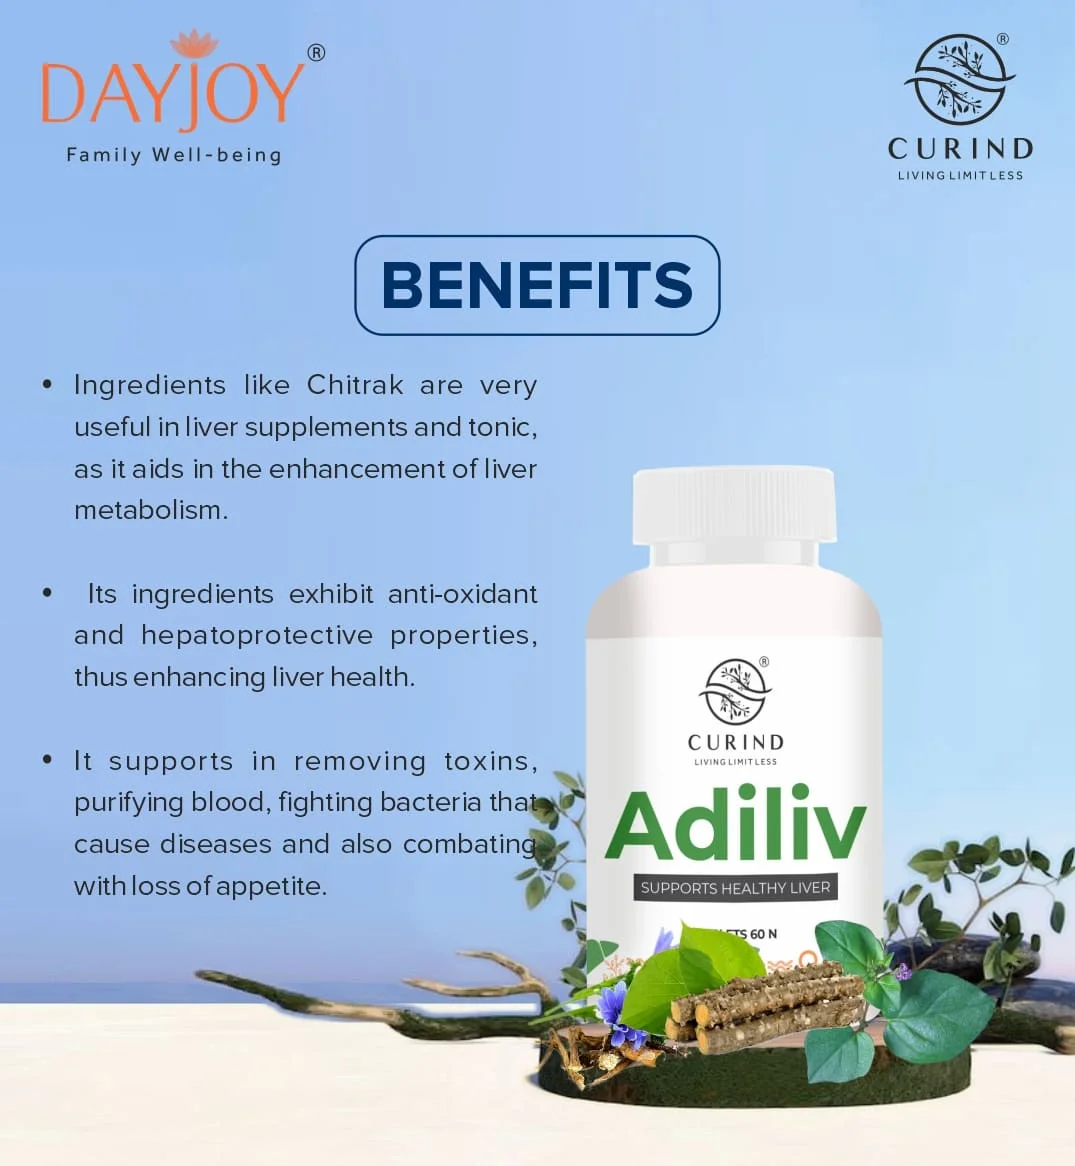 Adiliv tablets- perfect for complete liver care